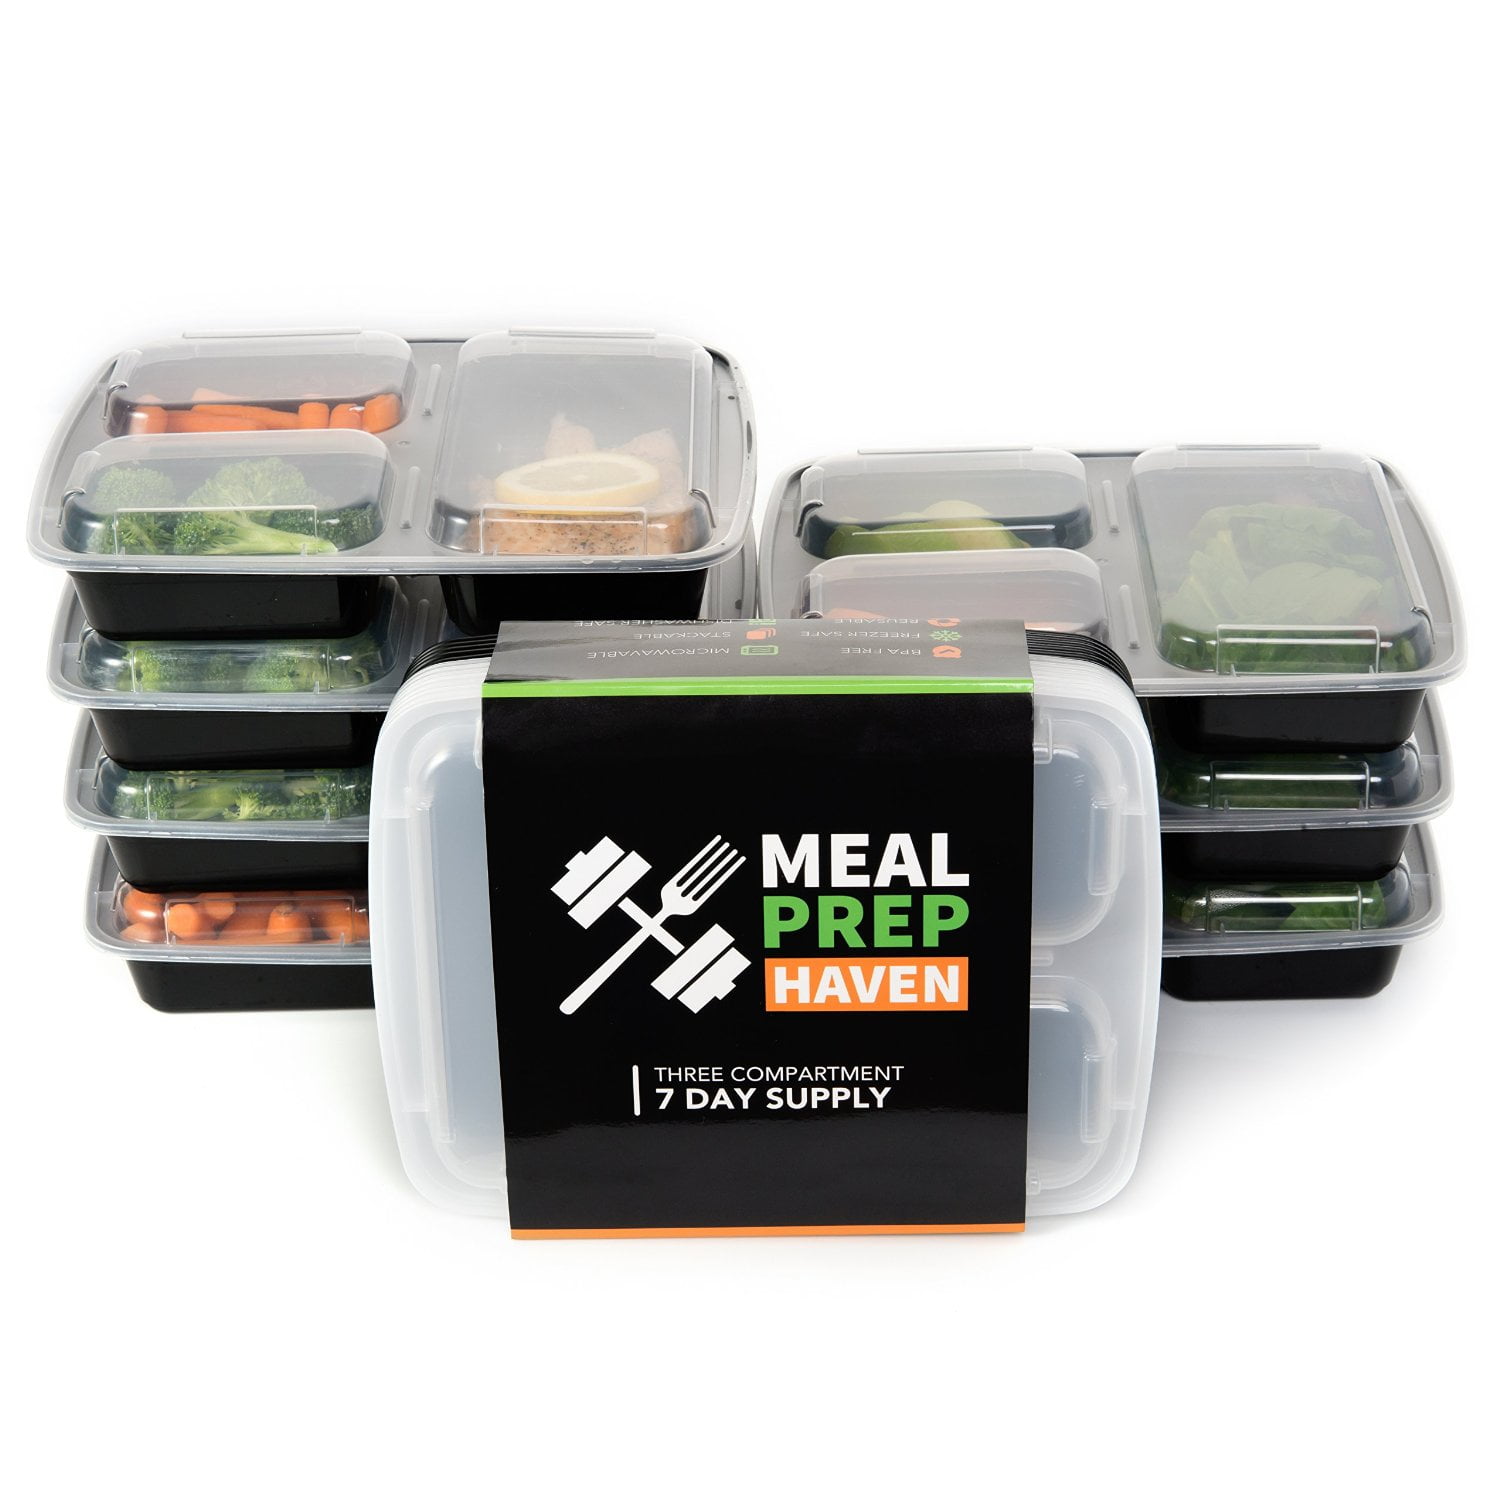 15 x Meal Prep Food Containers Microwavable BPA Free Reusable Plastic Lunch Box